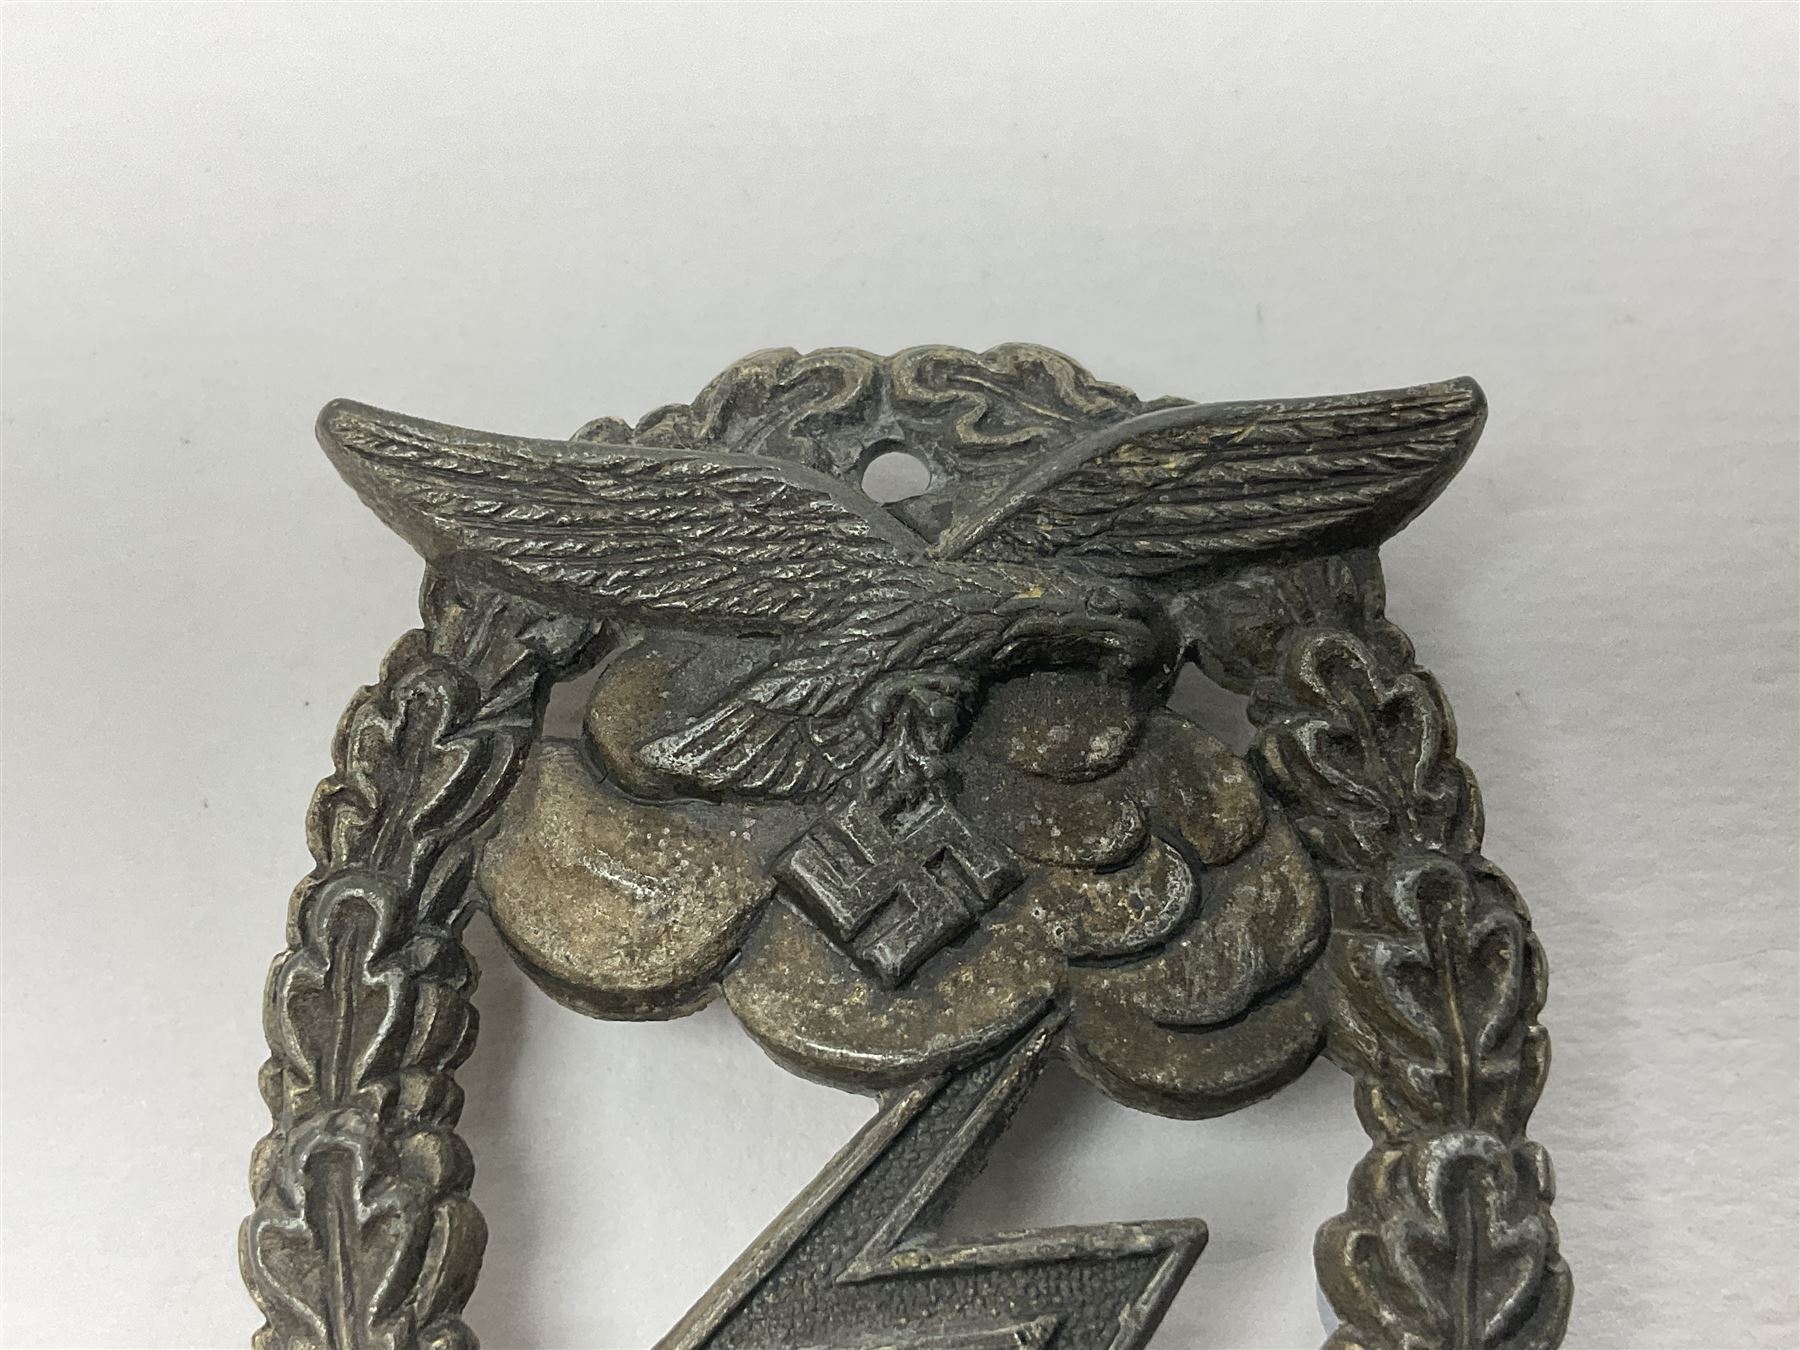 Two WW2 German Luftwaffe Ground Assault/Combat badges - one with flat pin and maker's mark M.u.K.; t - Image 7 of 9